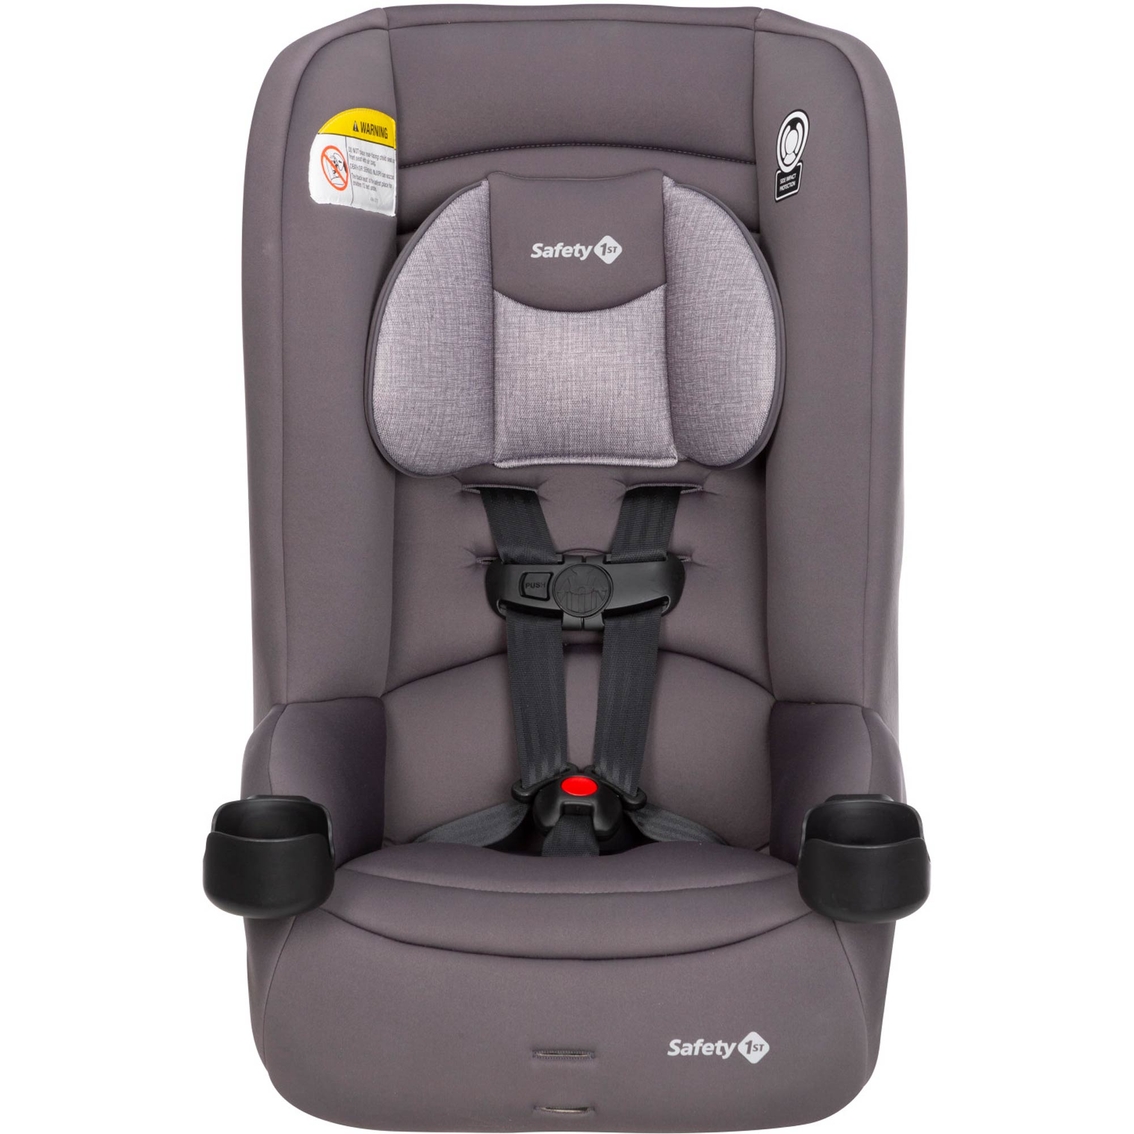 Safety 1st Jive 2 in 1 Convertible Car Seat - Image 7 of 10